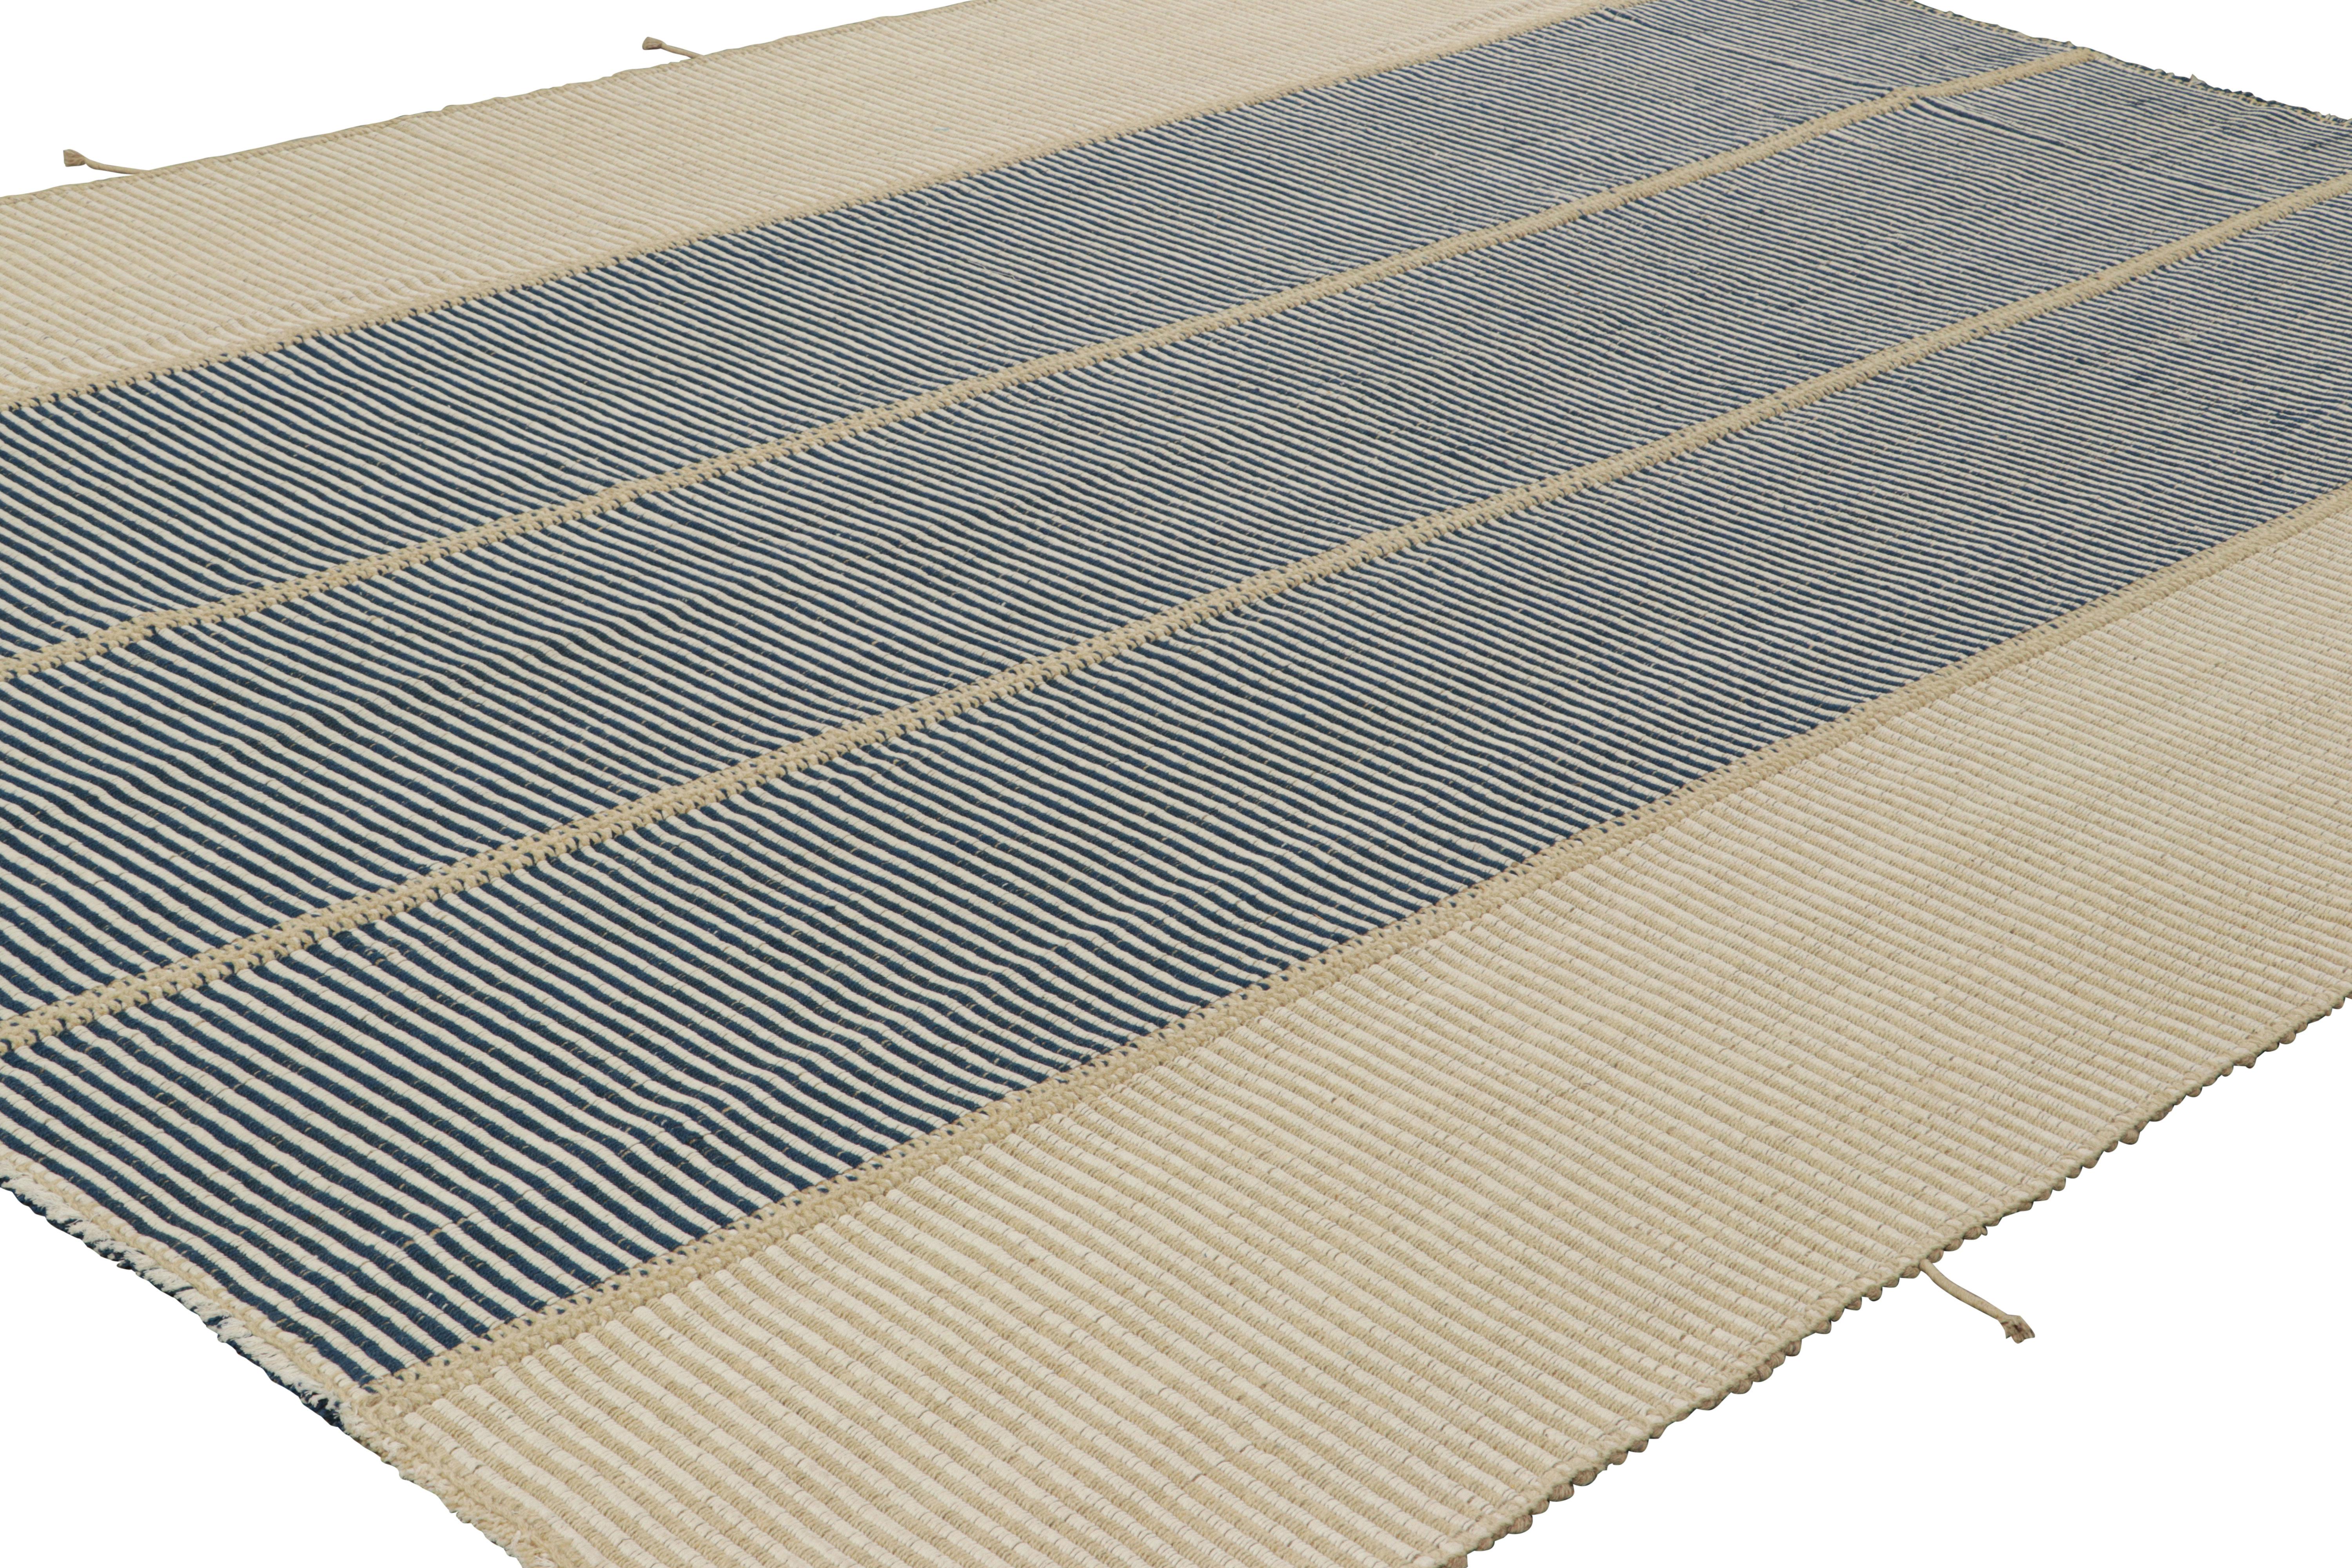 Afghan Rug & Kilim’s Contemporary Kilim in Beige and Blue Textural Stripes For Sale